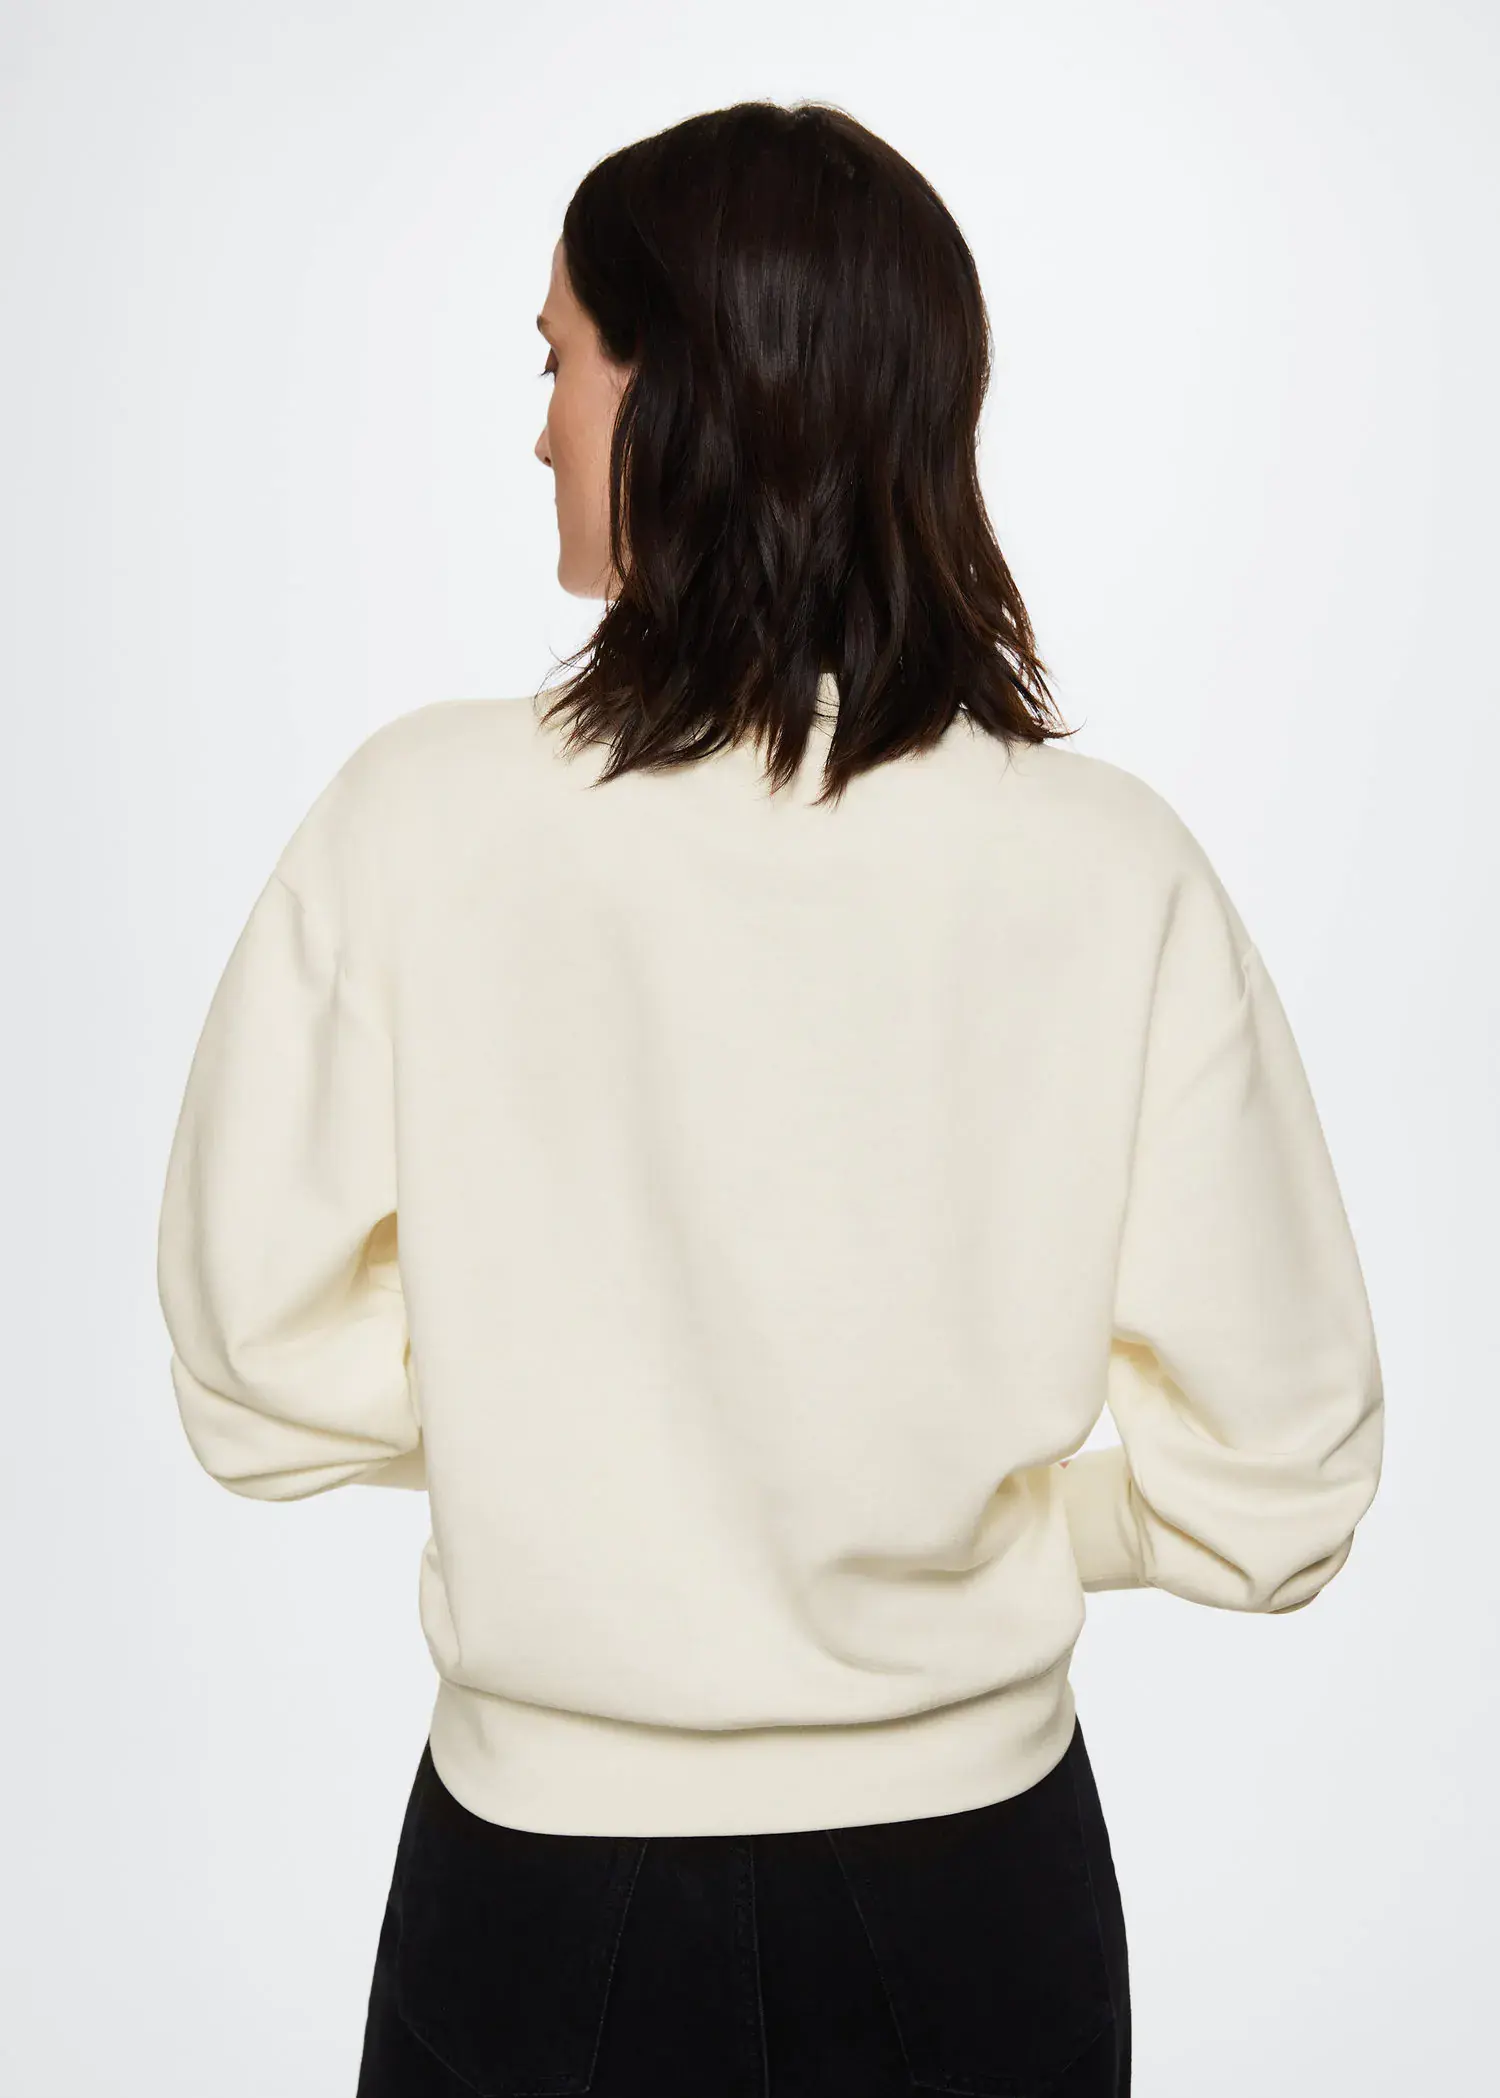 Mango Embroidered message sweatshirt. a woman wearing a white sweatshirt standing in front of a wall. 